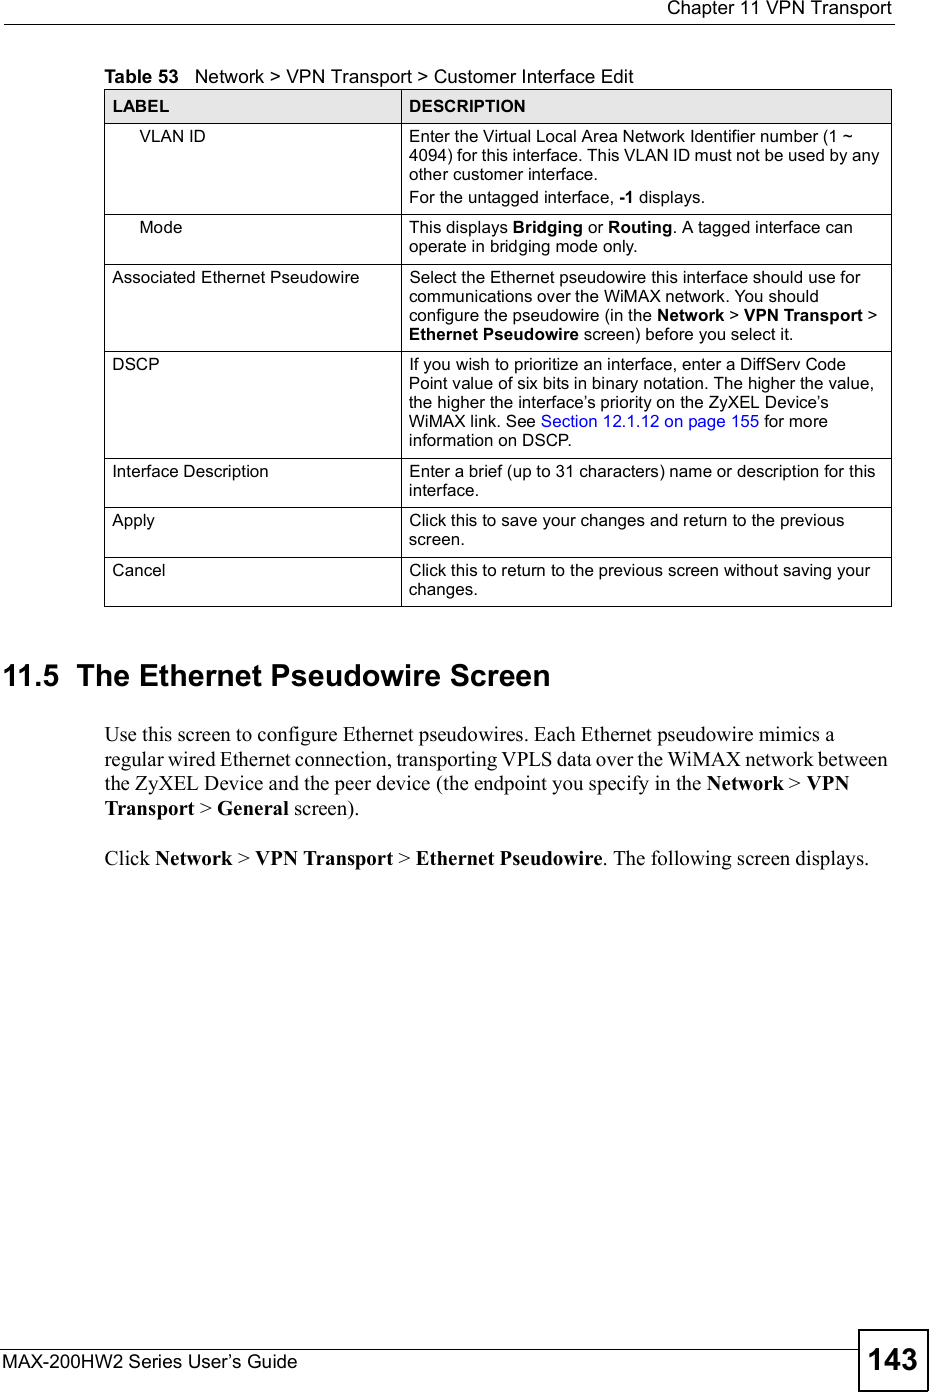  Chapter 11VPN TransportMAX-200HW2 Series User s Guide 14311.5  The Ethernet Pseudowire ScreenUse this screen to configure Ethernet pseudowires. Each Ethernet pseudowire mimics a regular wired Ethernet connection, transporting VPLS data over the WiMAX network between the ZyXEL Device and the peer device (the endpoint you specify in the Network &gt; VPN Transport &gt; General screen).Click Network &gt; VPN Transport &gt; Ethernet Pseudowire. The following screen displays.VLAN IDEnter the Virtual Local Area Network Identifier number (1 ~ 4094) for this interface. This VLAN ID must not be used by any other customer interface. For the untagged interface, -1 displays.ModeThis displays Bridging or Routing. A tagged interface can operate in bridging mode only.Associated Ethernet PseudowireSelect the Ethernet pseudowire this interface should use for communications over the WiMAX network. You should configure the pseudowire (in the Network &gt; VPN Transport &gt;Ethernet Pseudowire screen) before you select it.DSCPIf you wish to prioritize an interface, enter a DiffServ Code Point value of six bits in binary notation. The higher the value, the higher the interface s priority on the ZyXEL Device s WiMAX link. See Section 12.1.12 on page 155 for more information on DSCP.Interface DescriptionEnter a brief (up to 31 characters) name or description for this interface.ApplyClick this to save your changes and return to the previous screen.CancelClick this to return to the previous screen without saving your changes.Table 53   Network &gt; VPN Transport &gt; Customer Interface EditLABEL DESCRIPTION